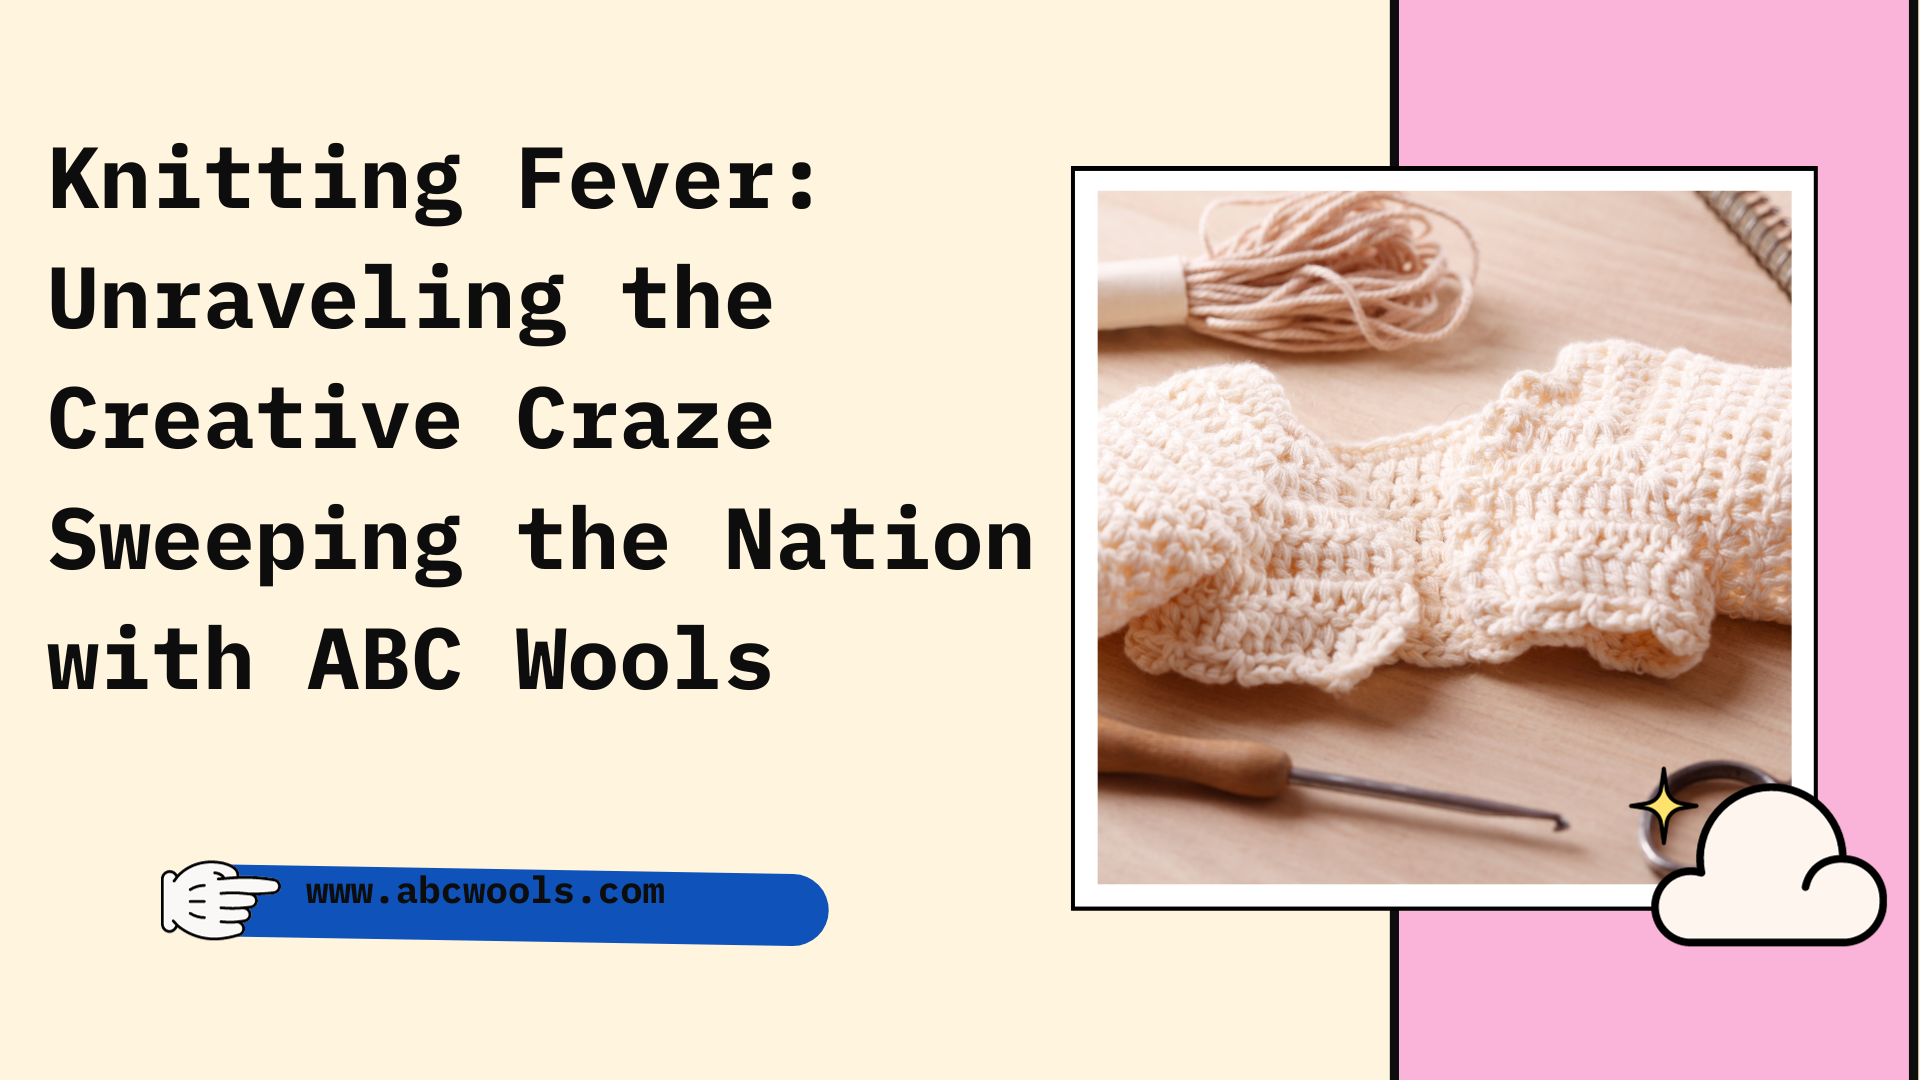 Knitting Fever Unraveling the Creative Craze Sweeping the Nation with ABC Wools